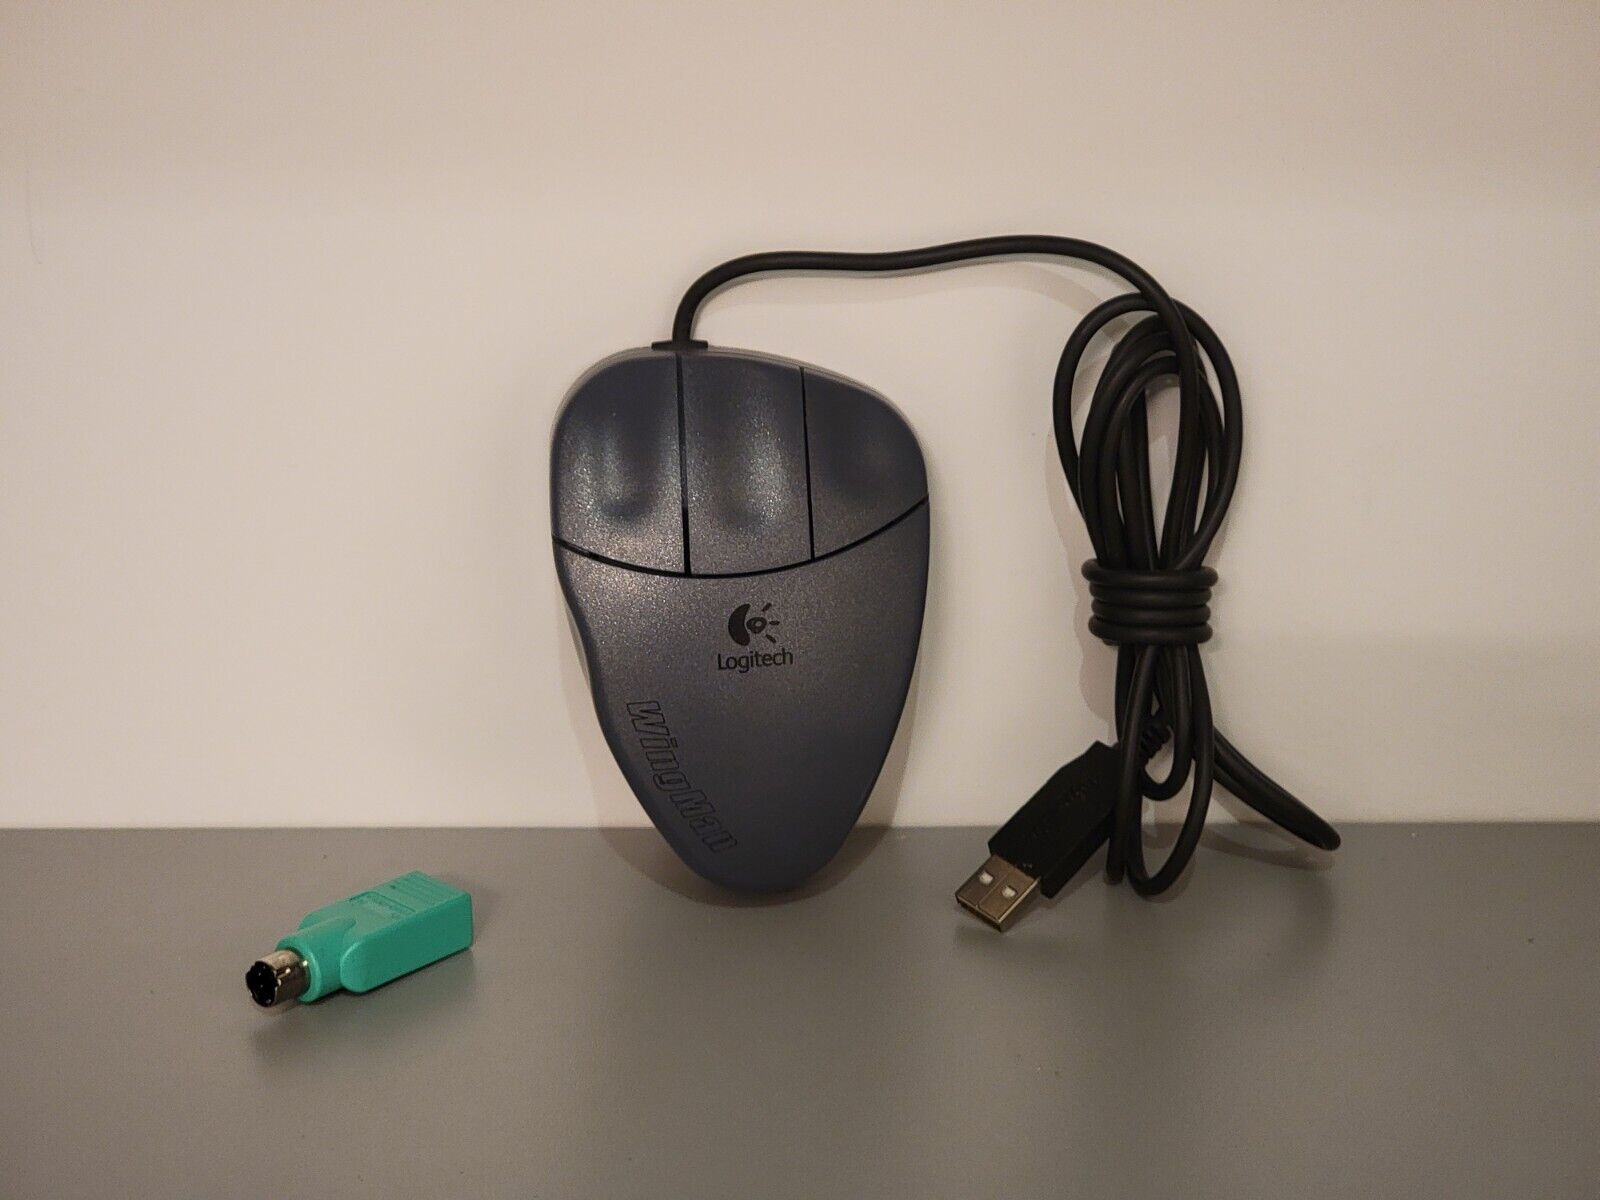 Vintage 1999 Logitech Wingman Gaming Mouse Model M-BC38 Tested